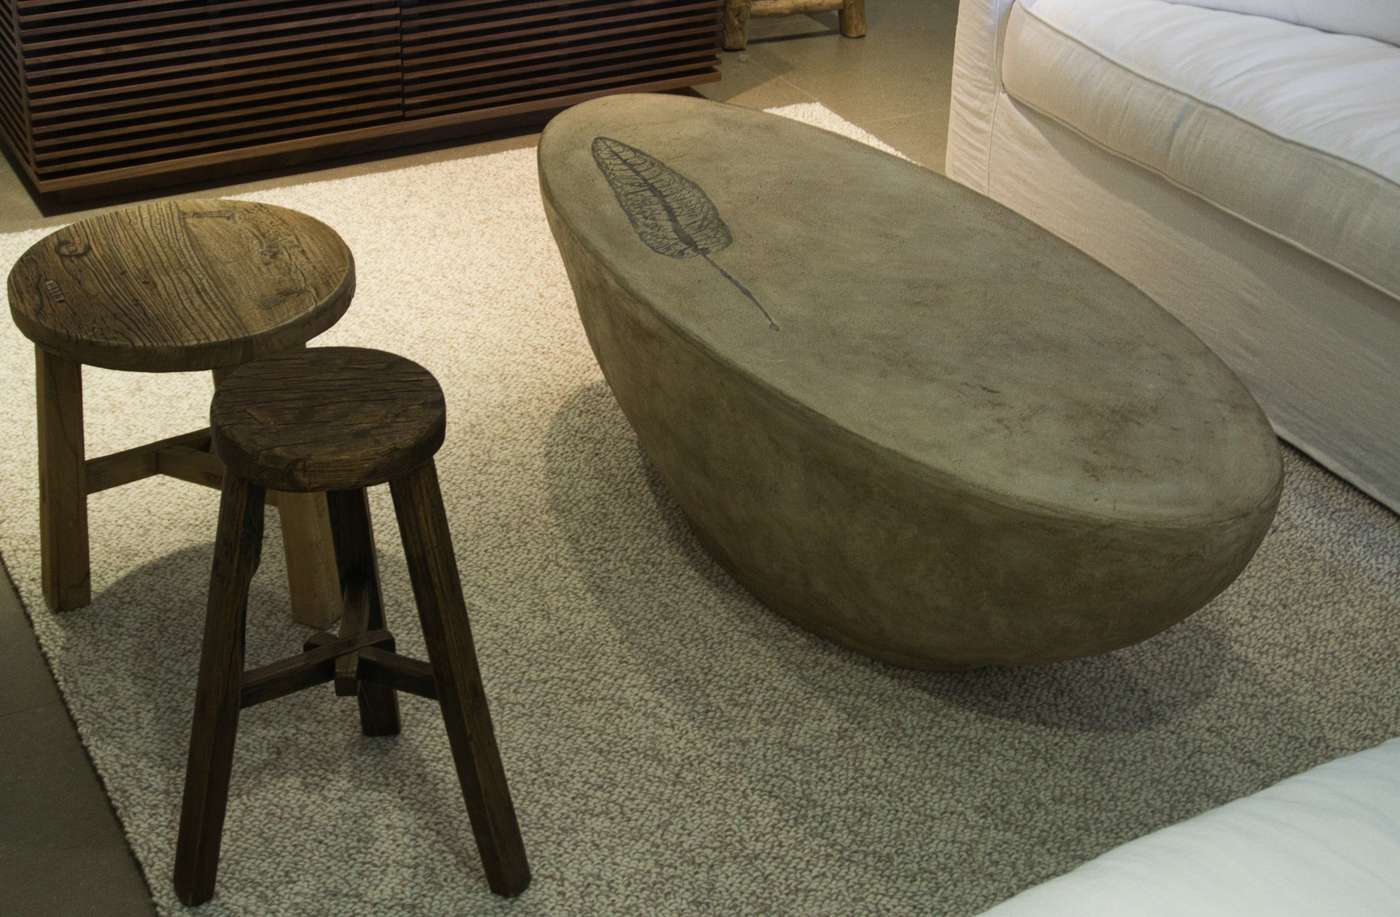 light brown oval concrete coffee table with botanical leaf design on top in rustic living room environment